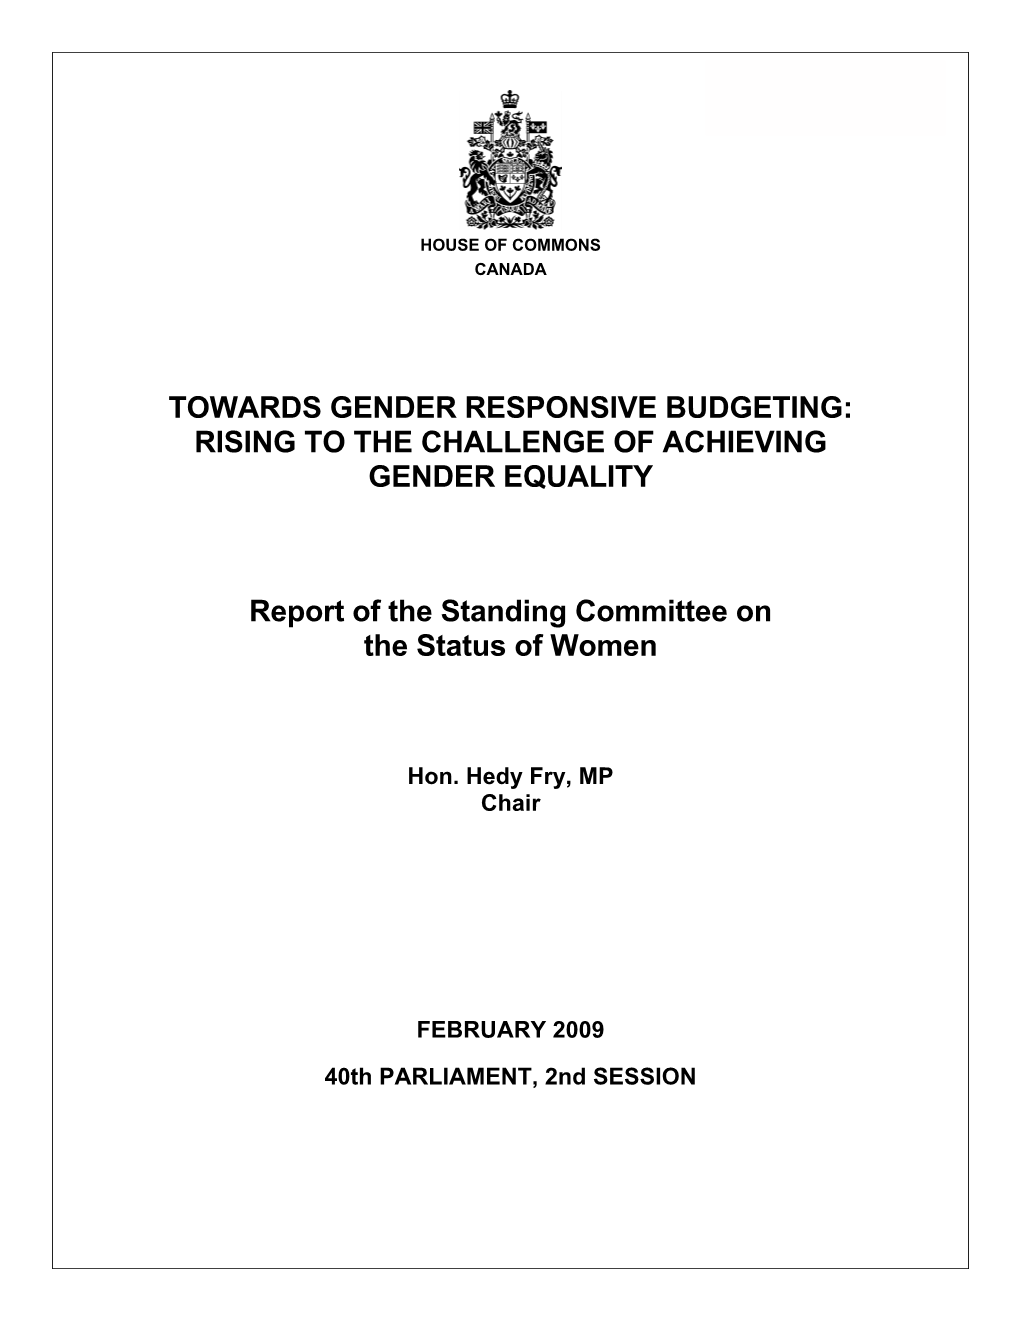 Towards Gender Responsive Budgeting: Rising to the Challenge of Achieving Gender Equality